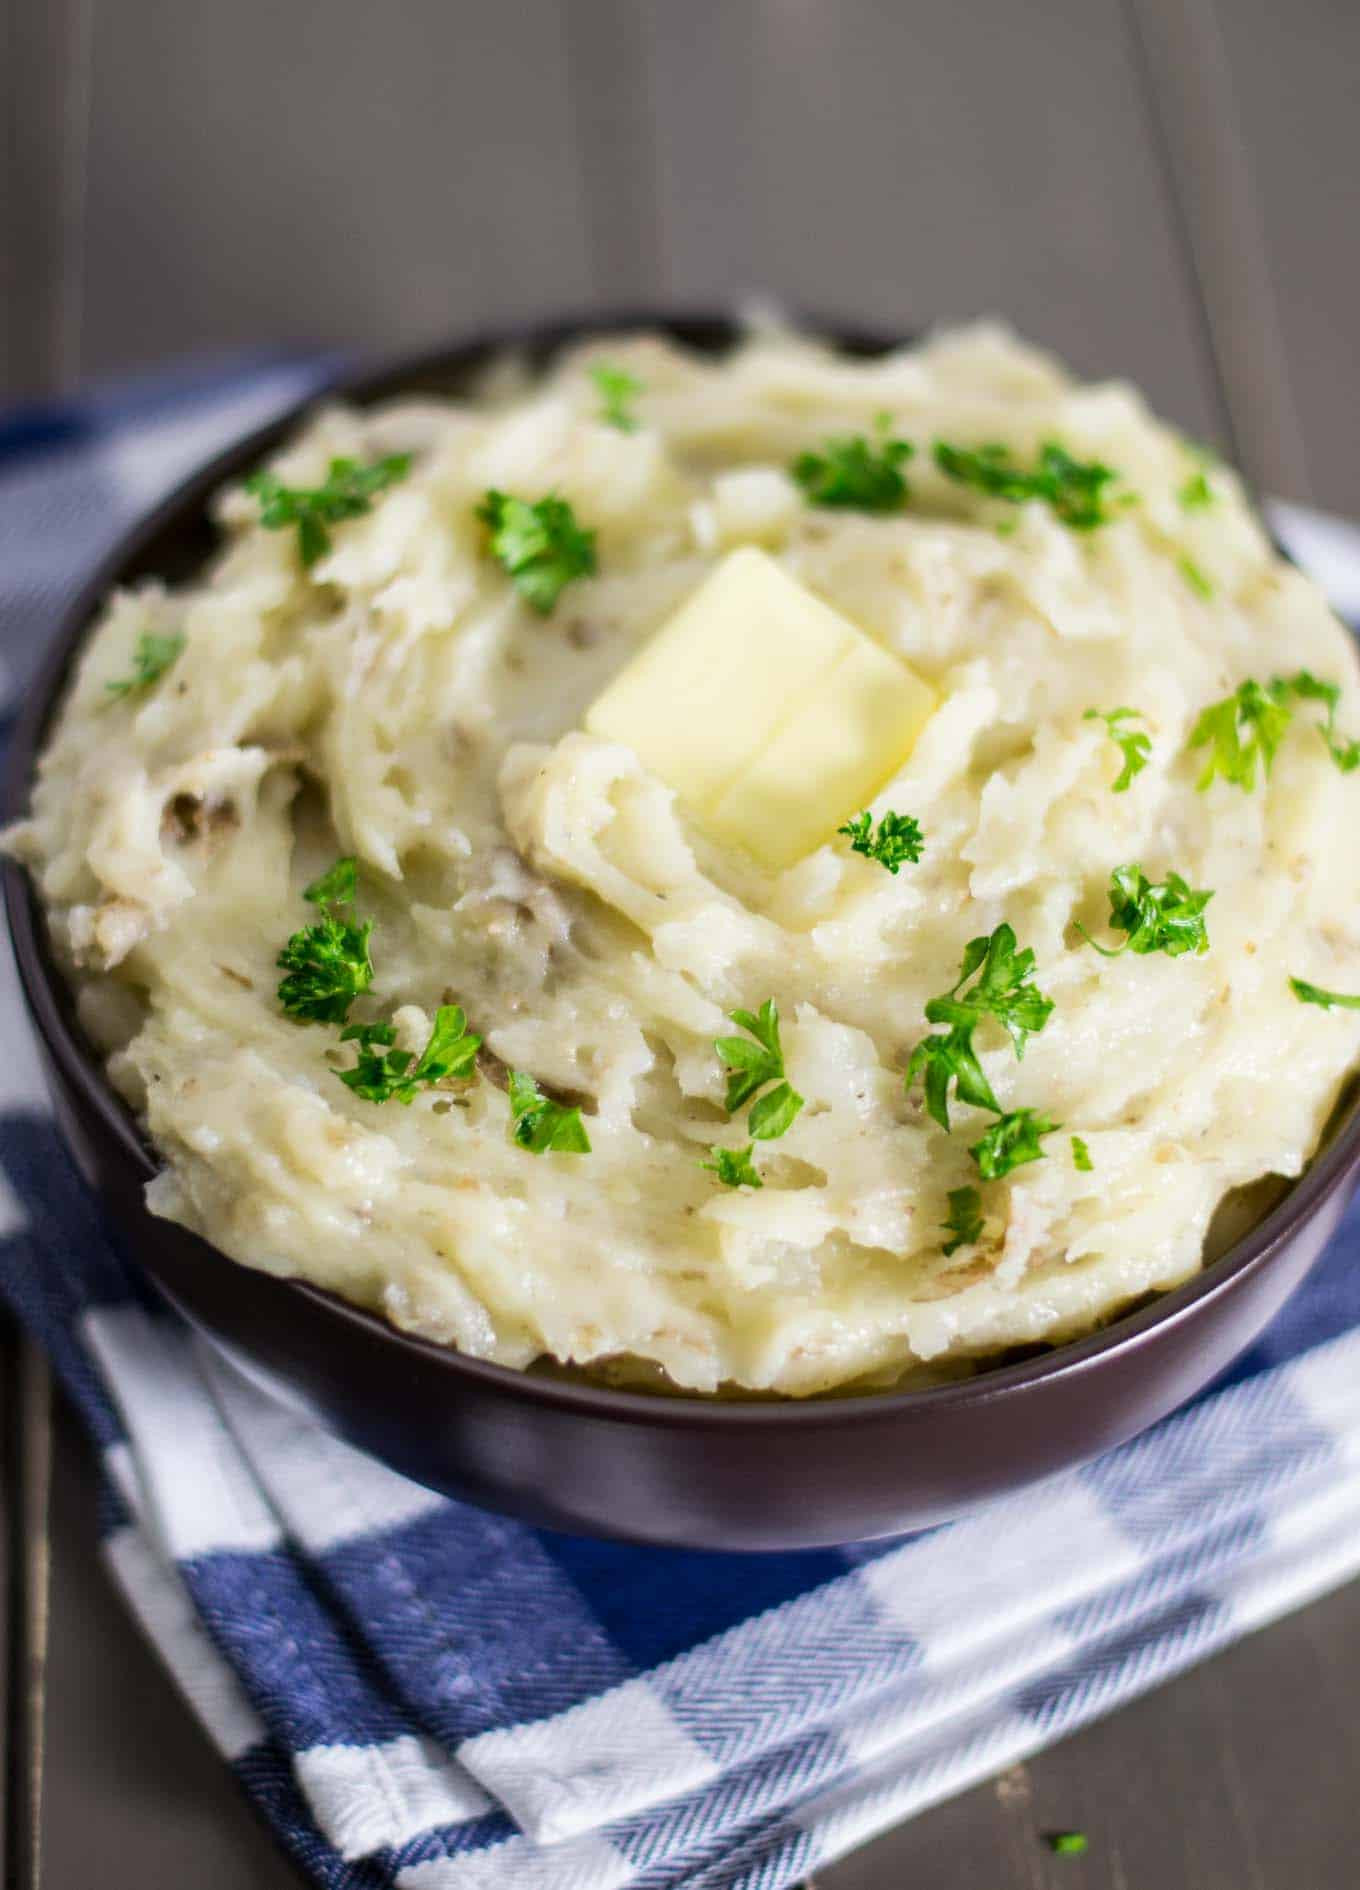 Vegan Mashed Potatoes Recipes Best Of Vegan Mashed Potatoes Recipe Dairy Free and Delicious